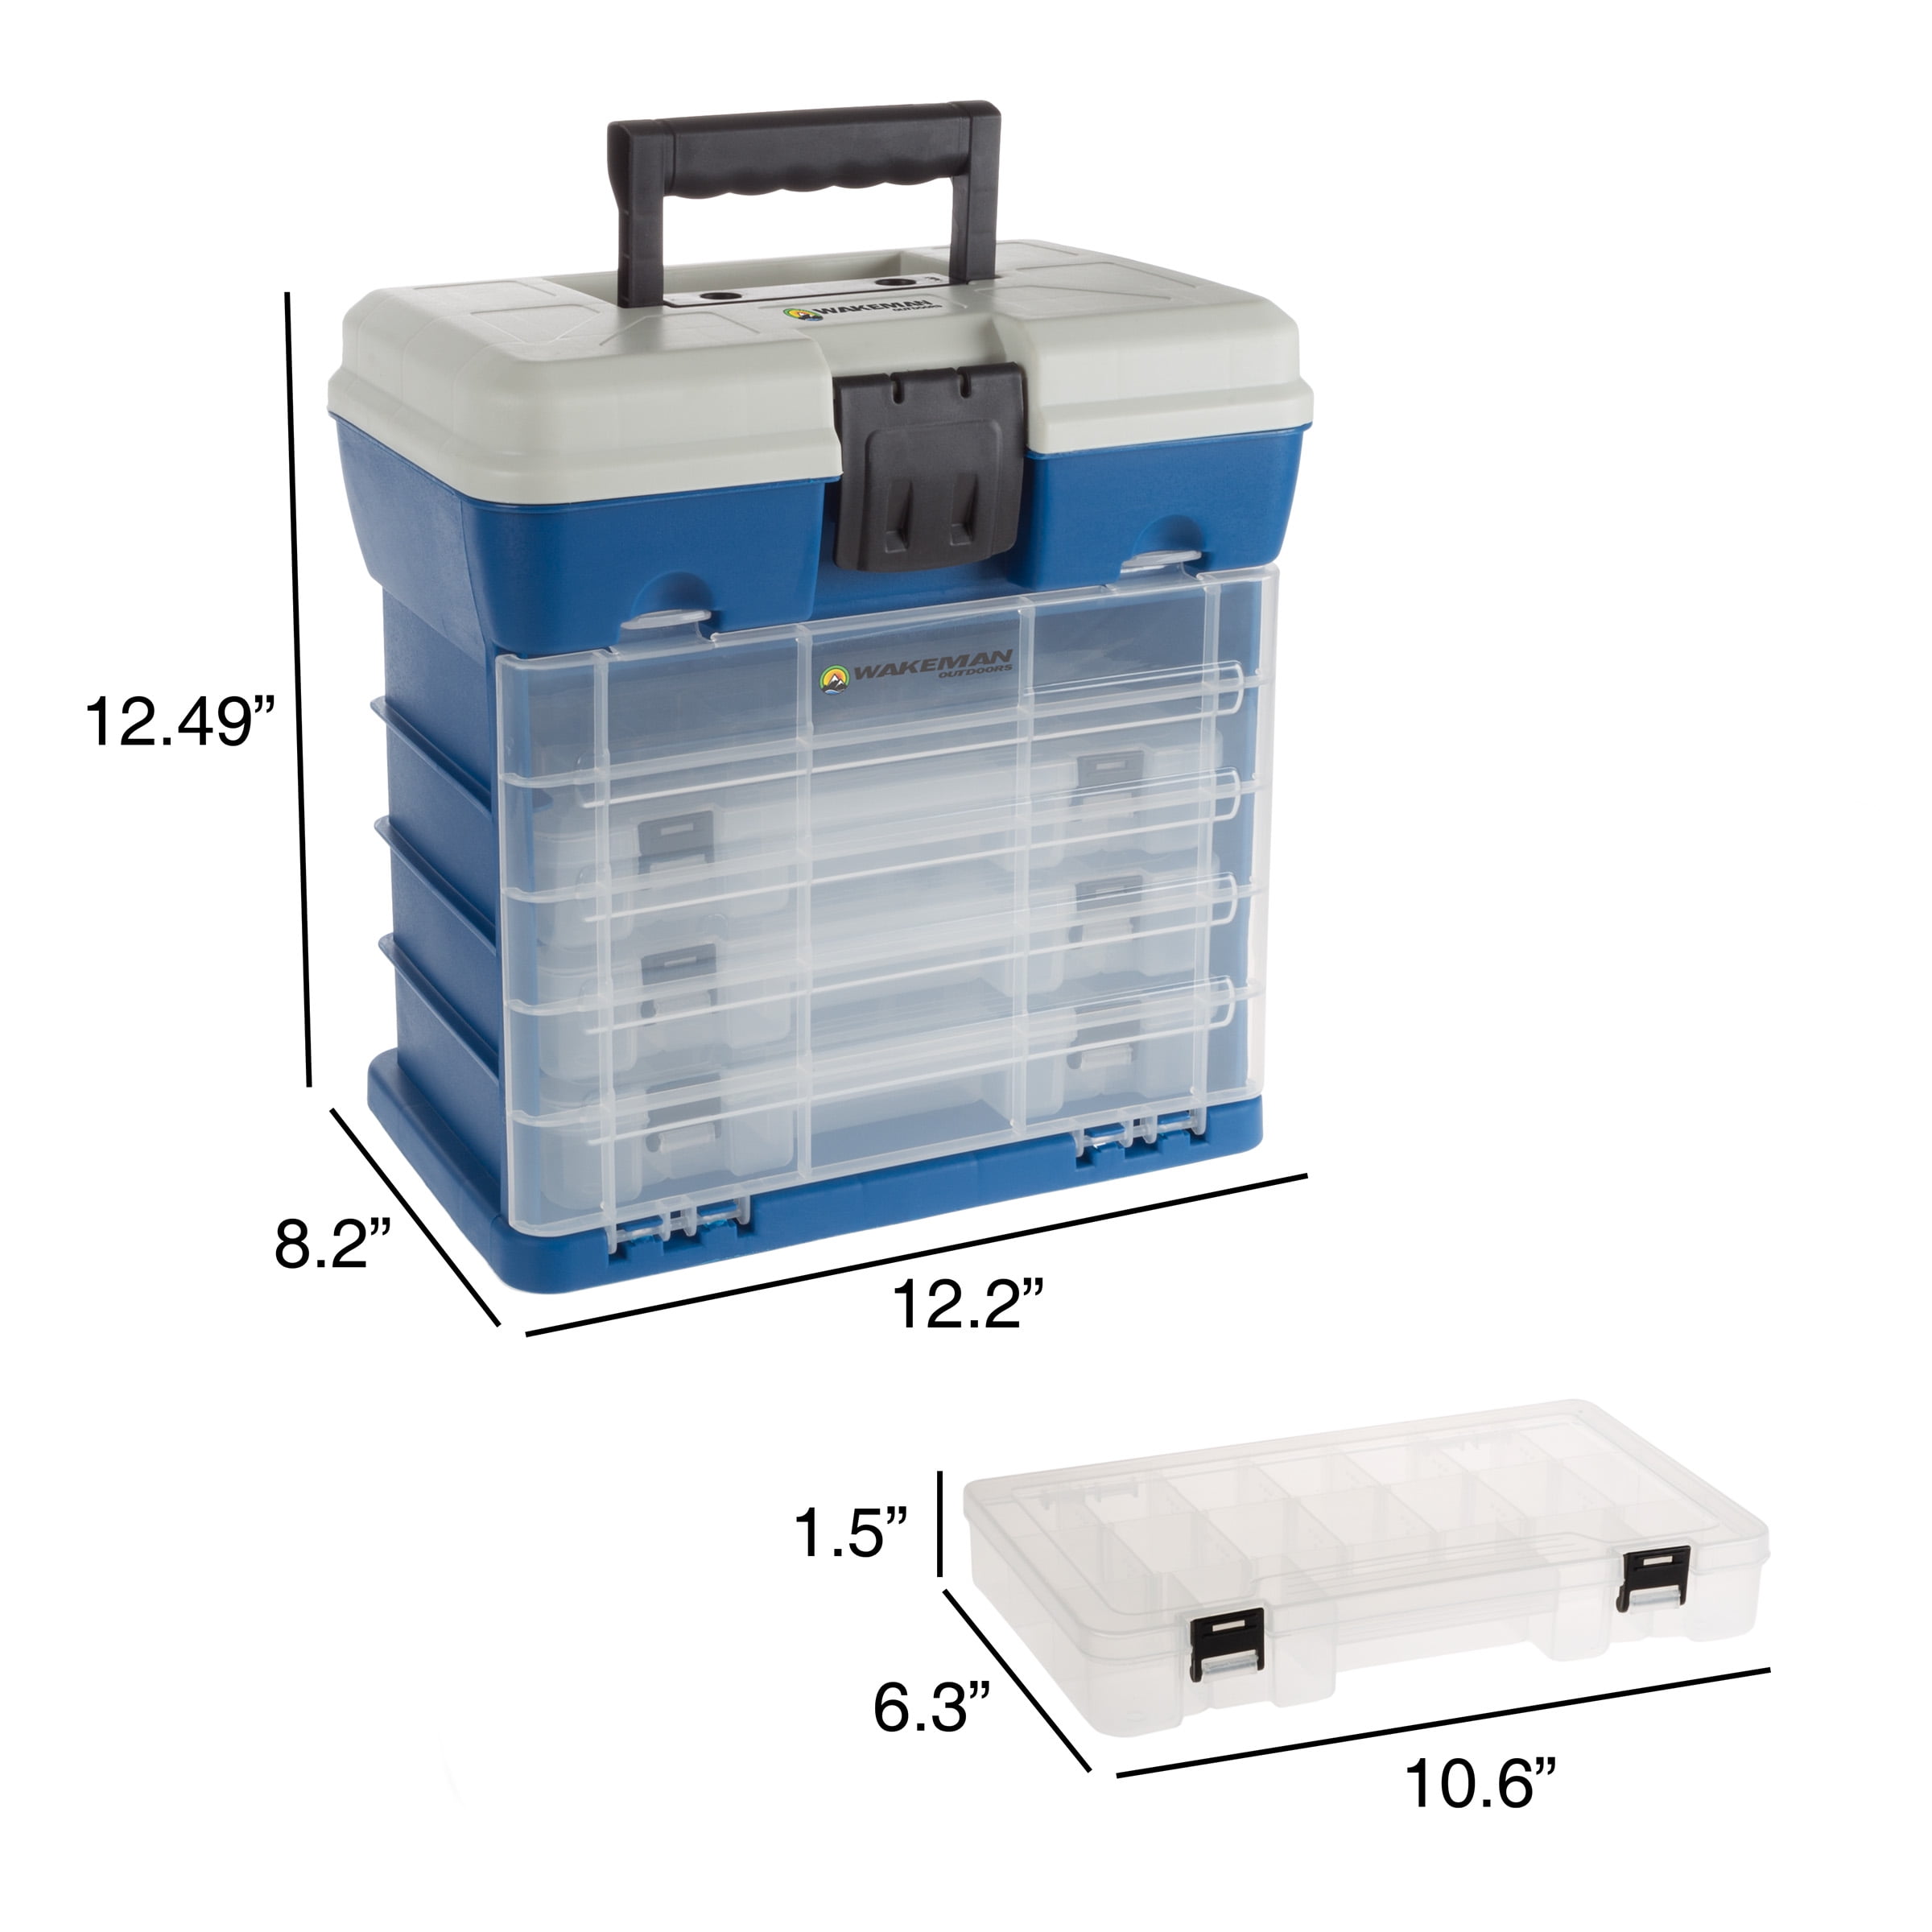 Tackle Box Organizer - Durable Plastic Storage Tacklebox and Craft Supplies  by Wakeman.